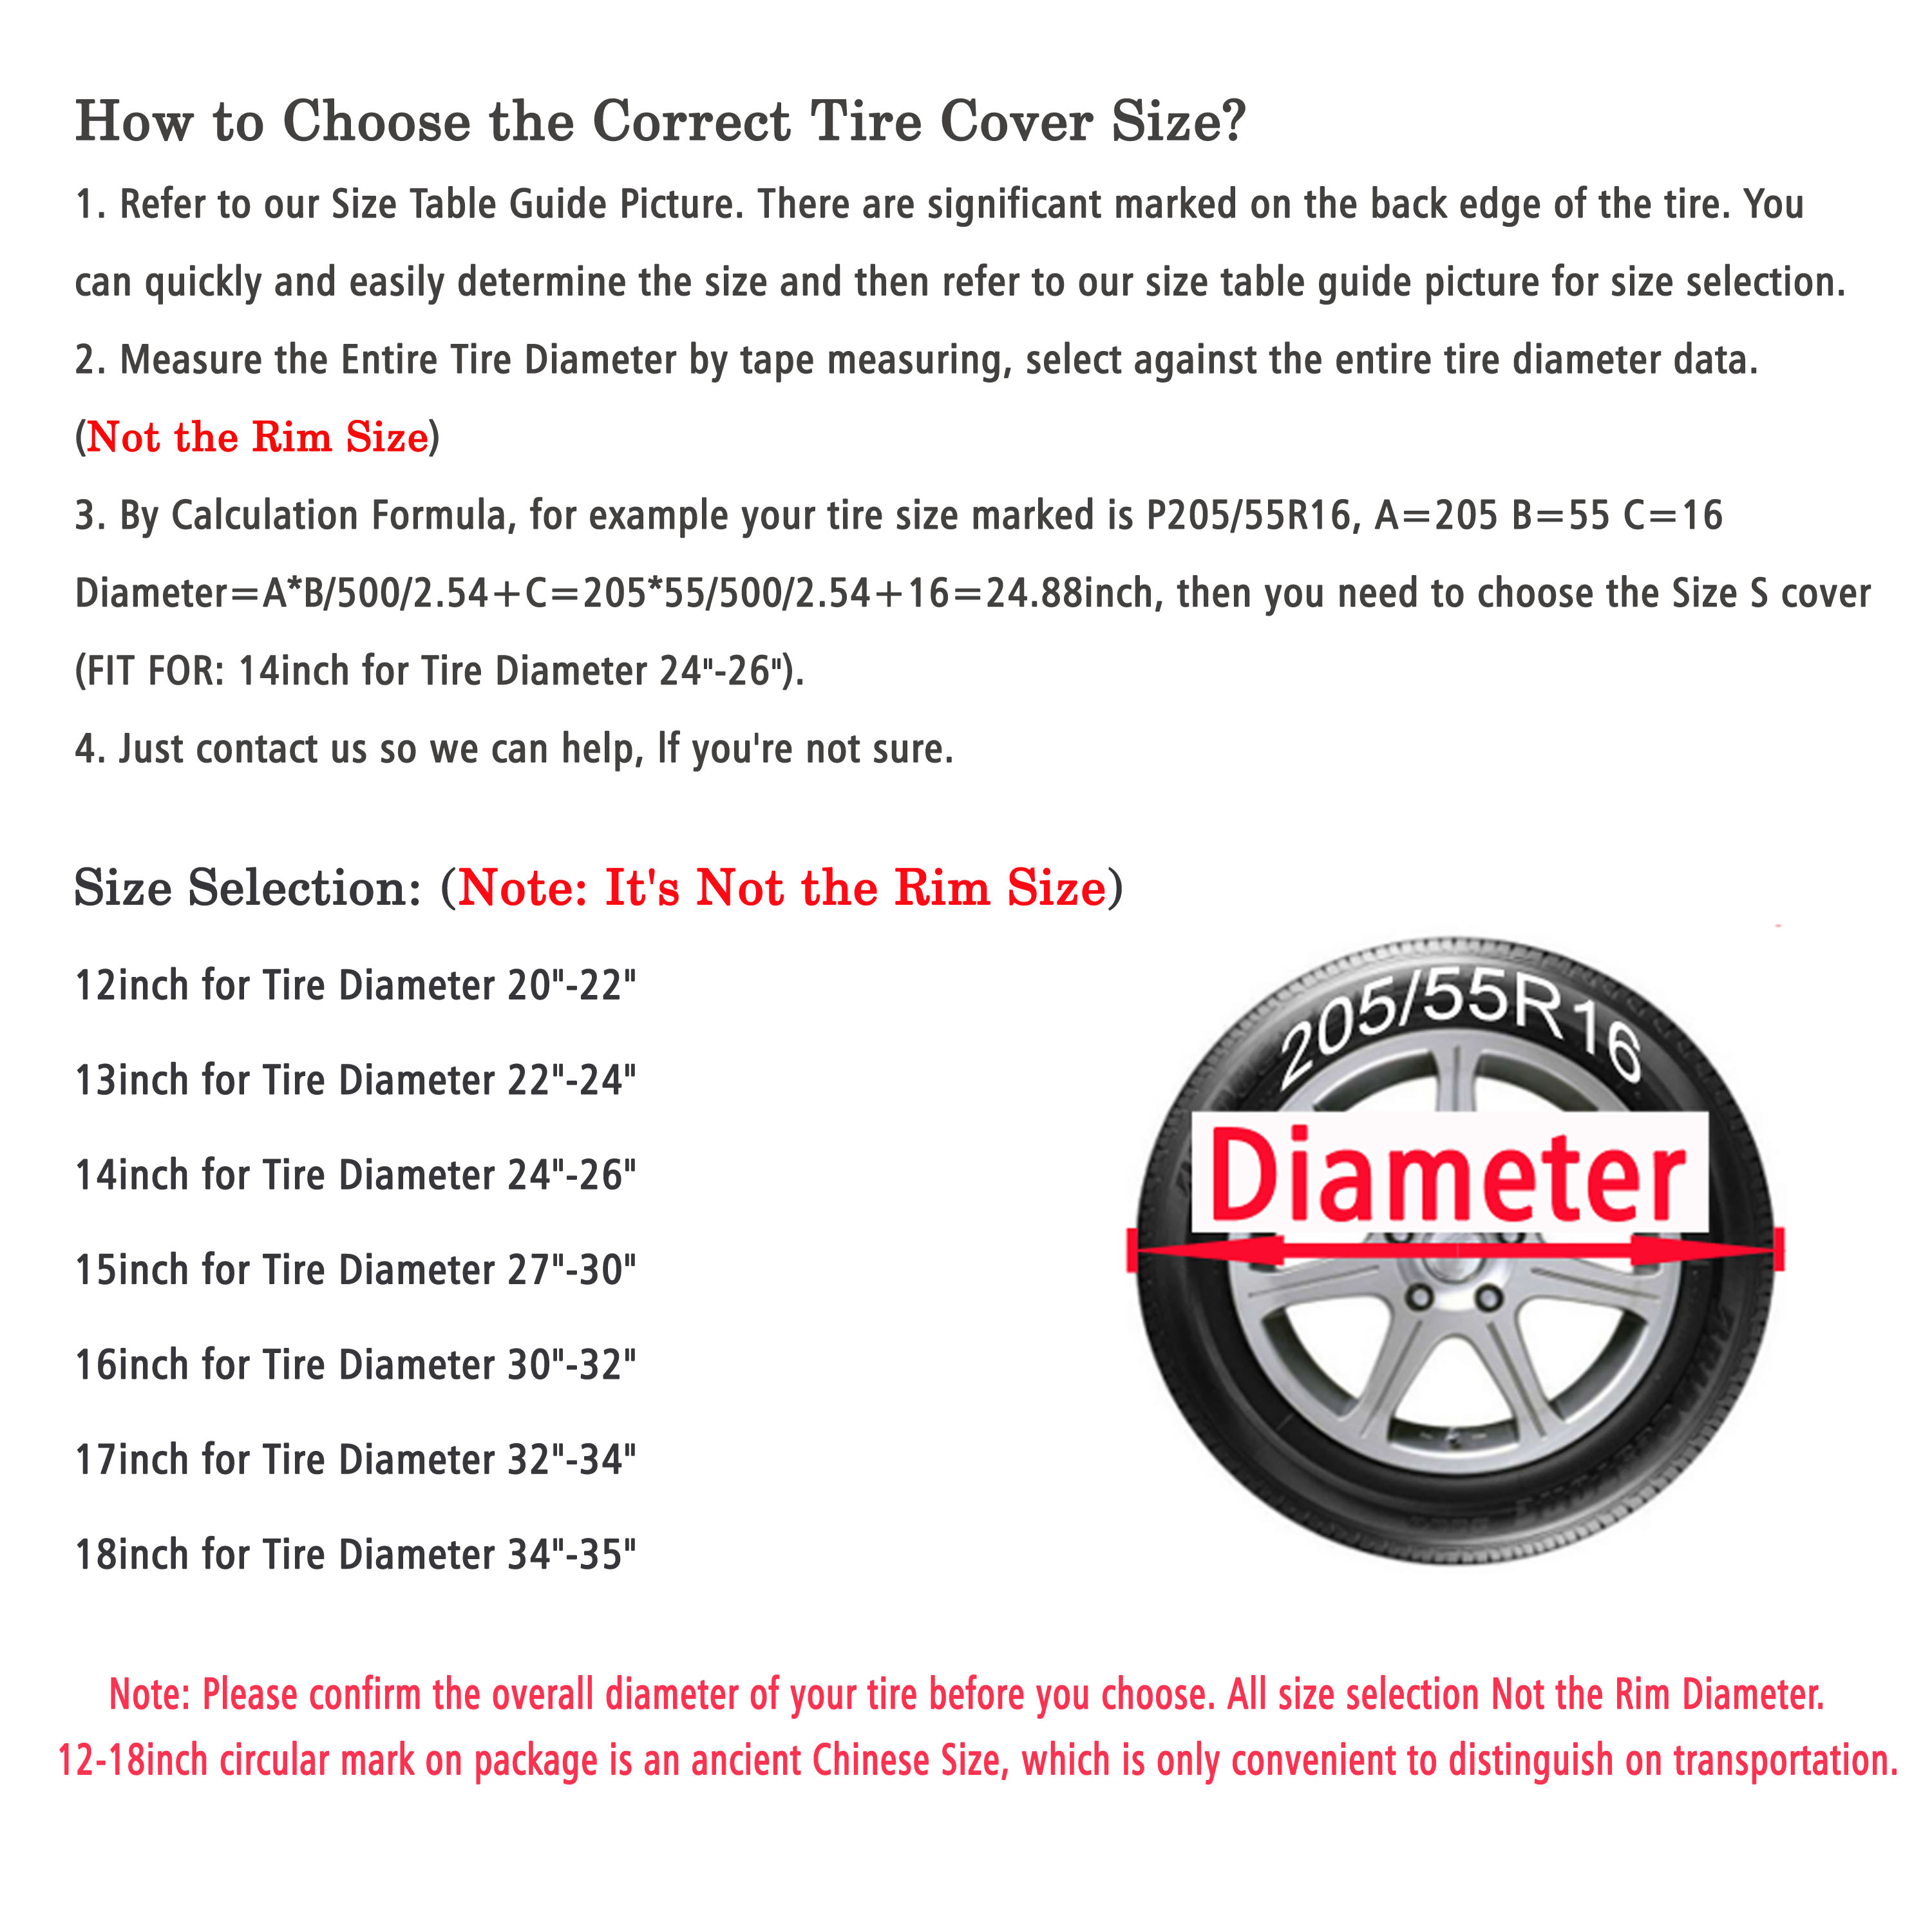 Moonet PVC Thickening Leather Spare Tire Wheel Cover for Car Truck SUV  Camper Trailer Universal Fit RV JP FJ, R18 XXL Black (for Overall Wheel  Diameter 34-35 inch)